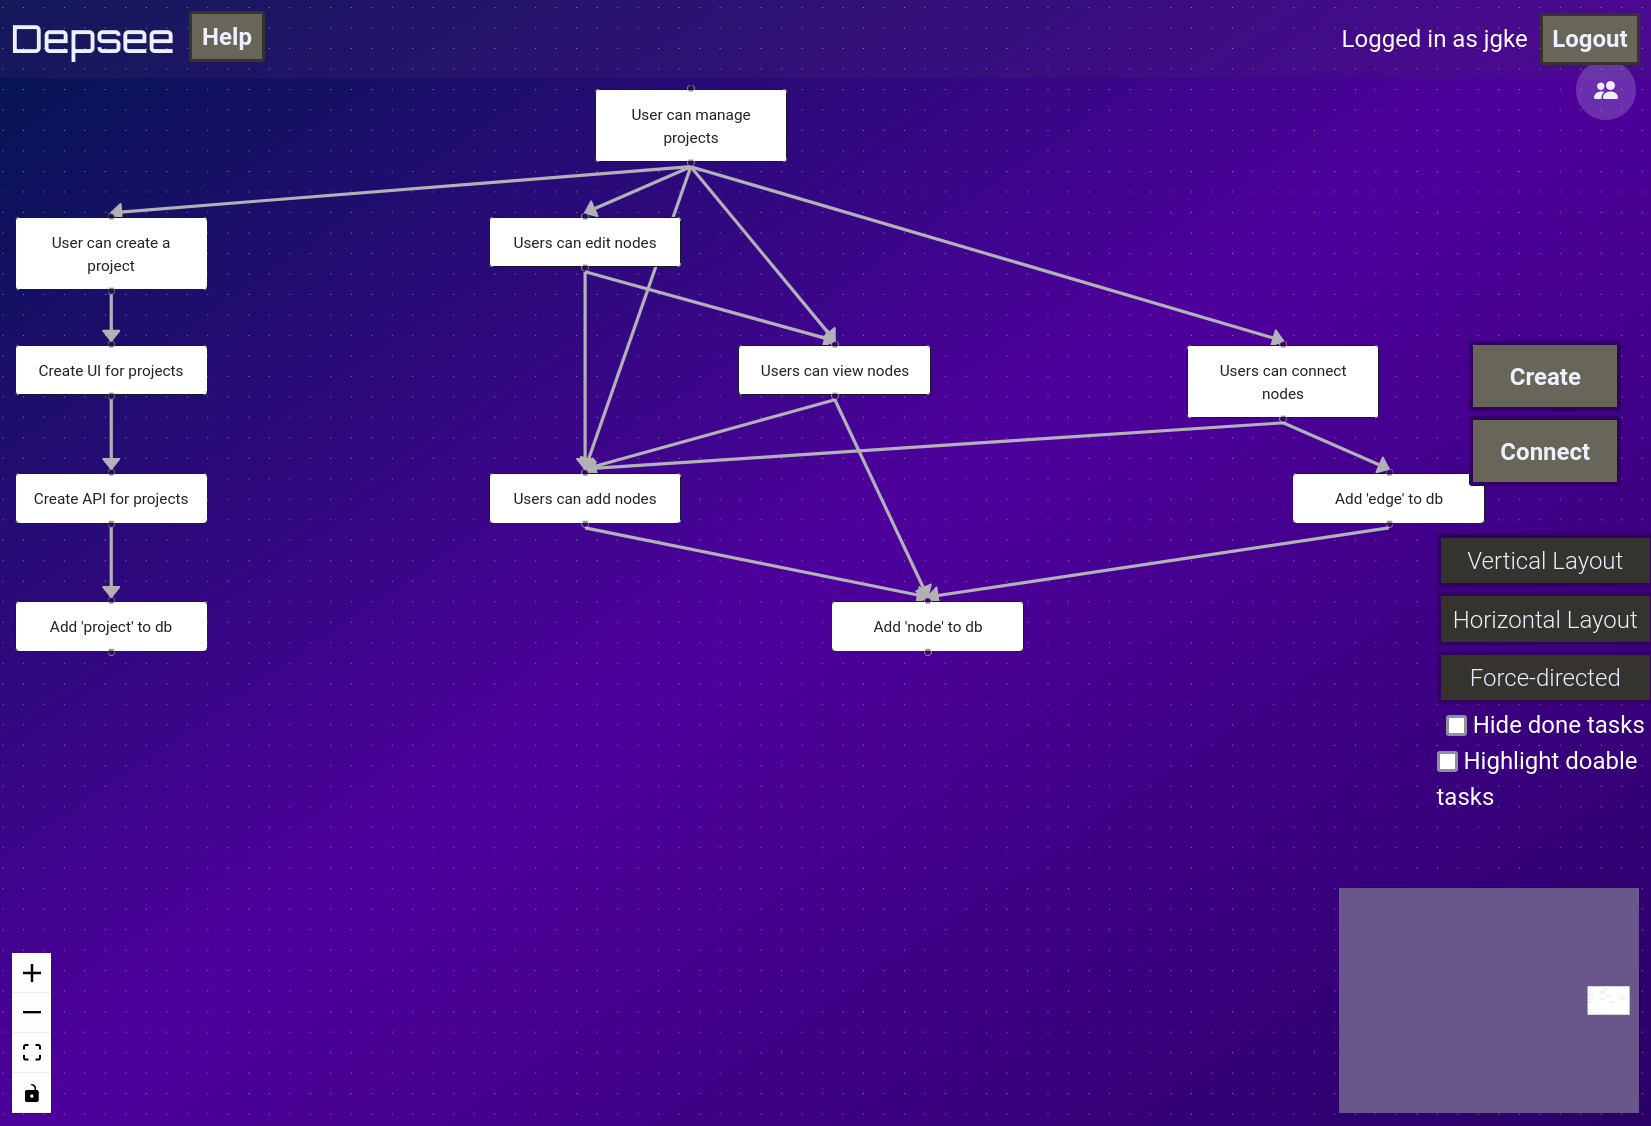 Screenshot of Depsee, showing a graph with several task nodes and dependency edges between them.